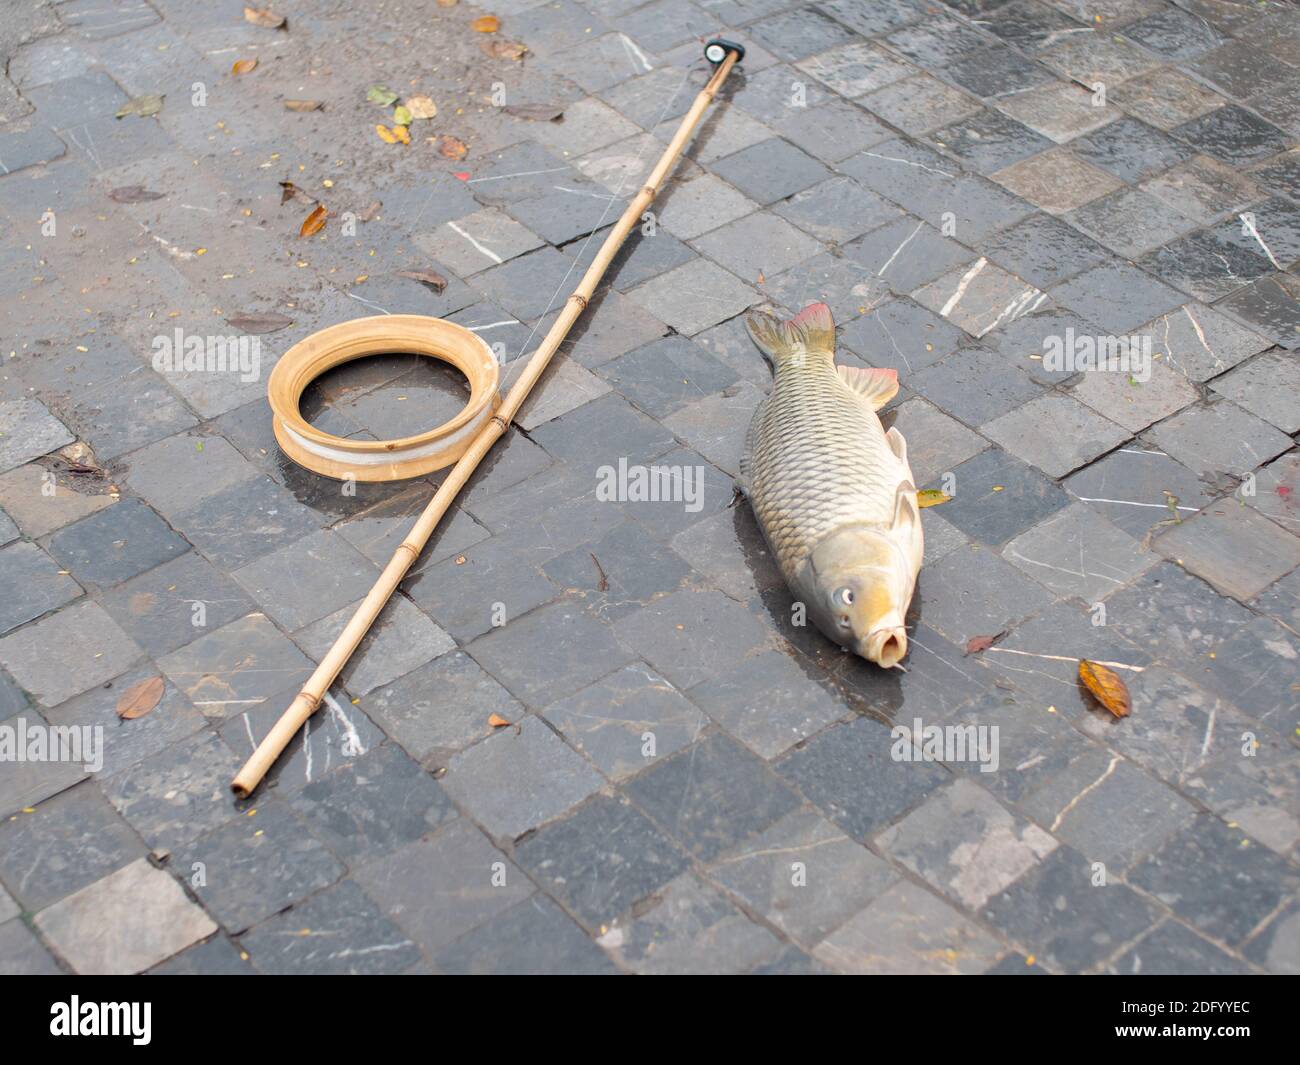 A freshly caught Asian black carp lies on concrete next to a bamboo fishing rod in central Hanoi, Vietnam. Stock Photo